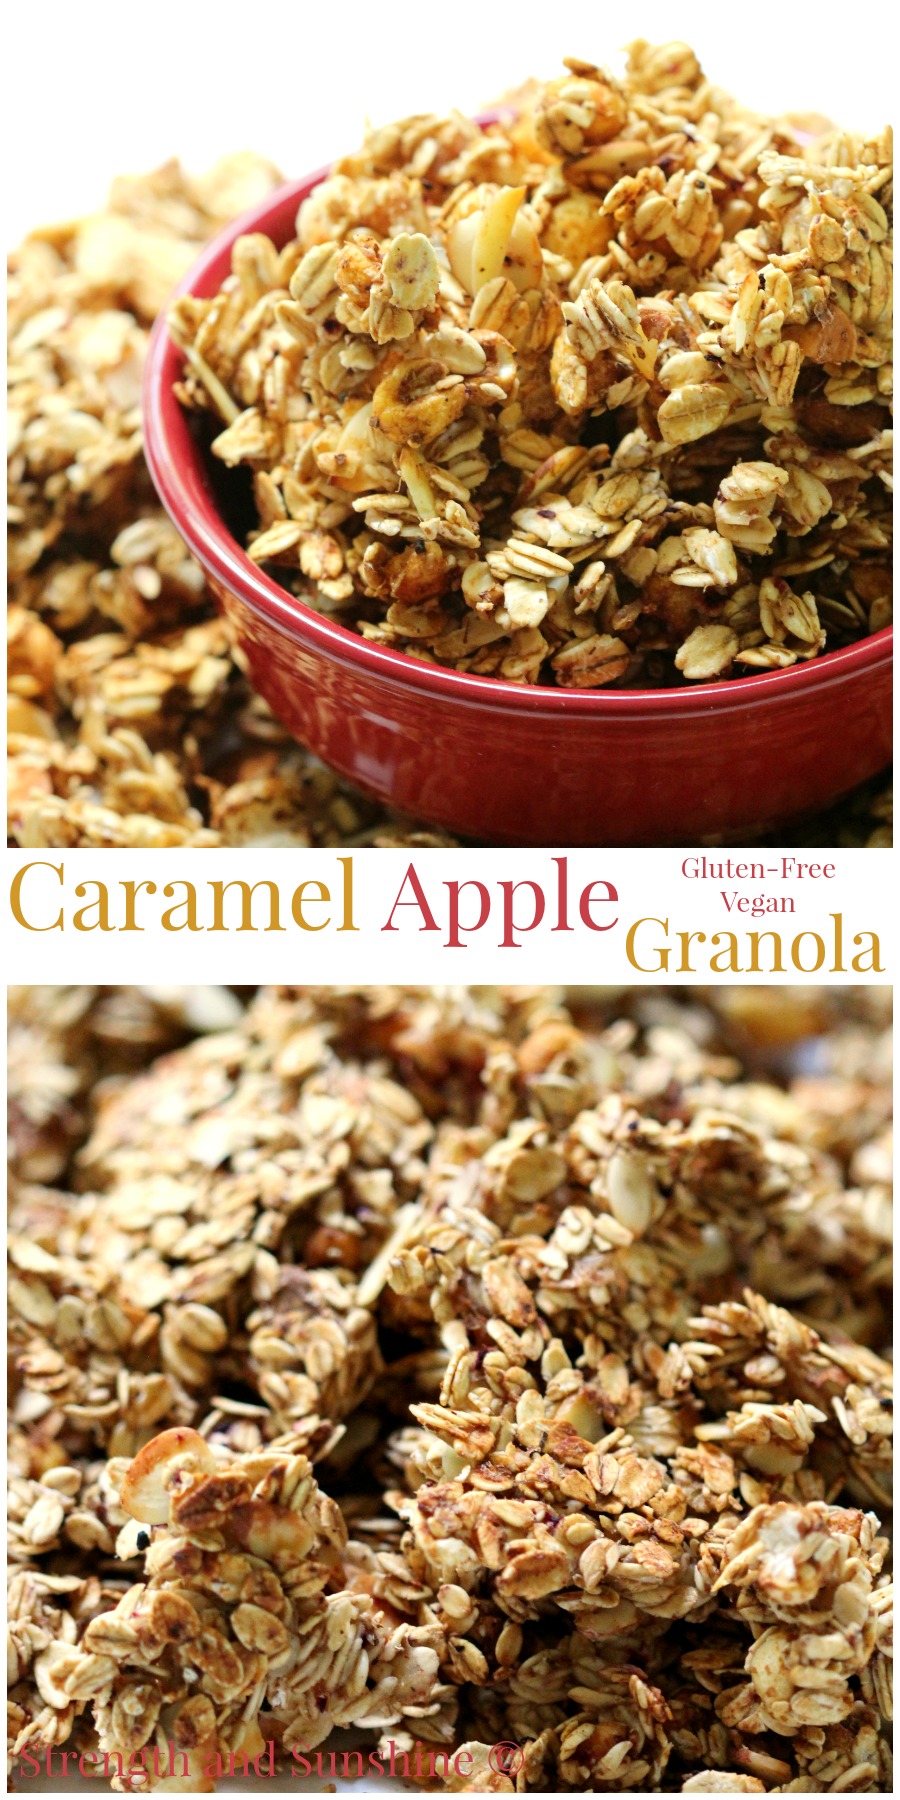 Caramel Apple Granola | Strength and Sunshine @RebeccaGF666 An easy granola with all the seasonal flavors; healthy, gluten-free, vegan, and sugar-free. Caramel Apple Granola is perfect for breakfast, snacking, or topping a dessert!